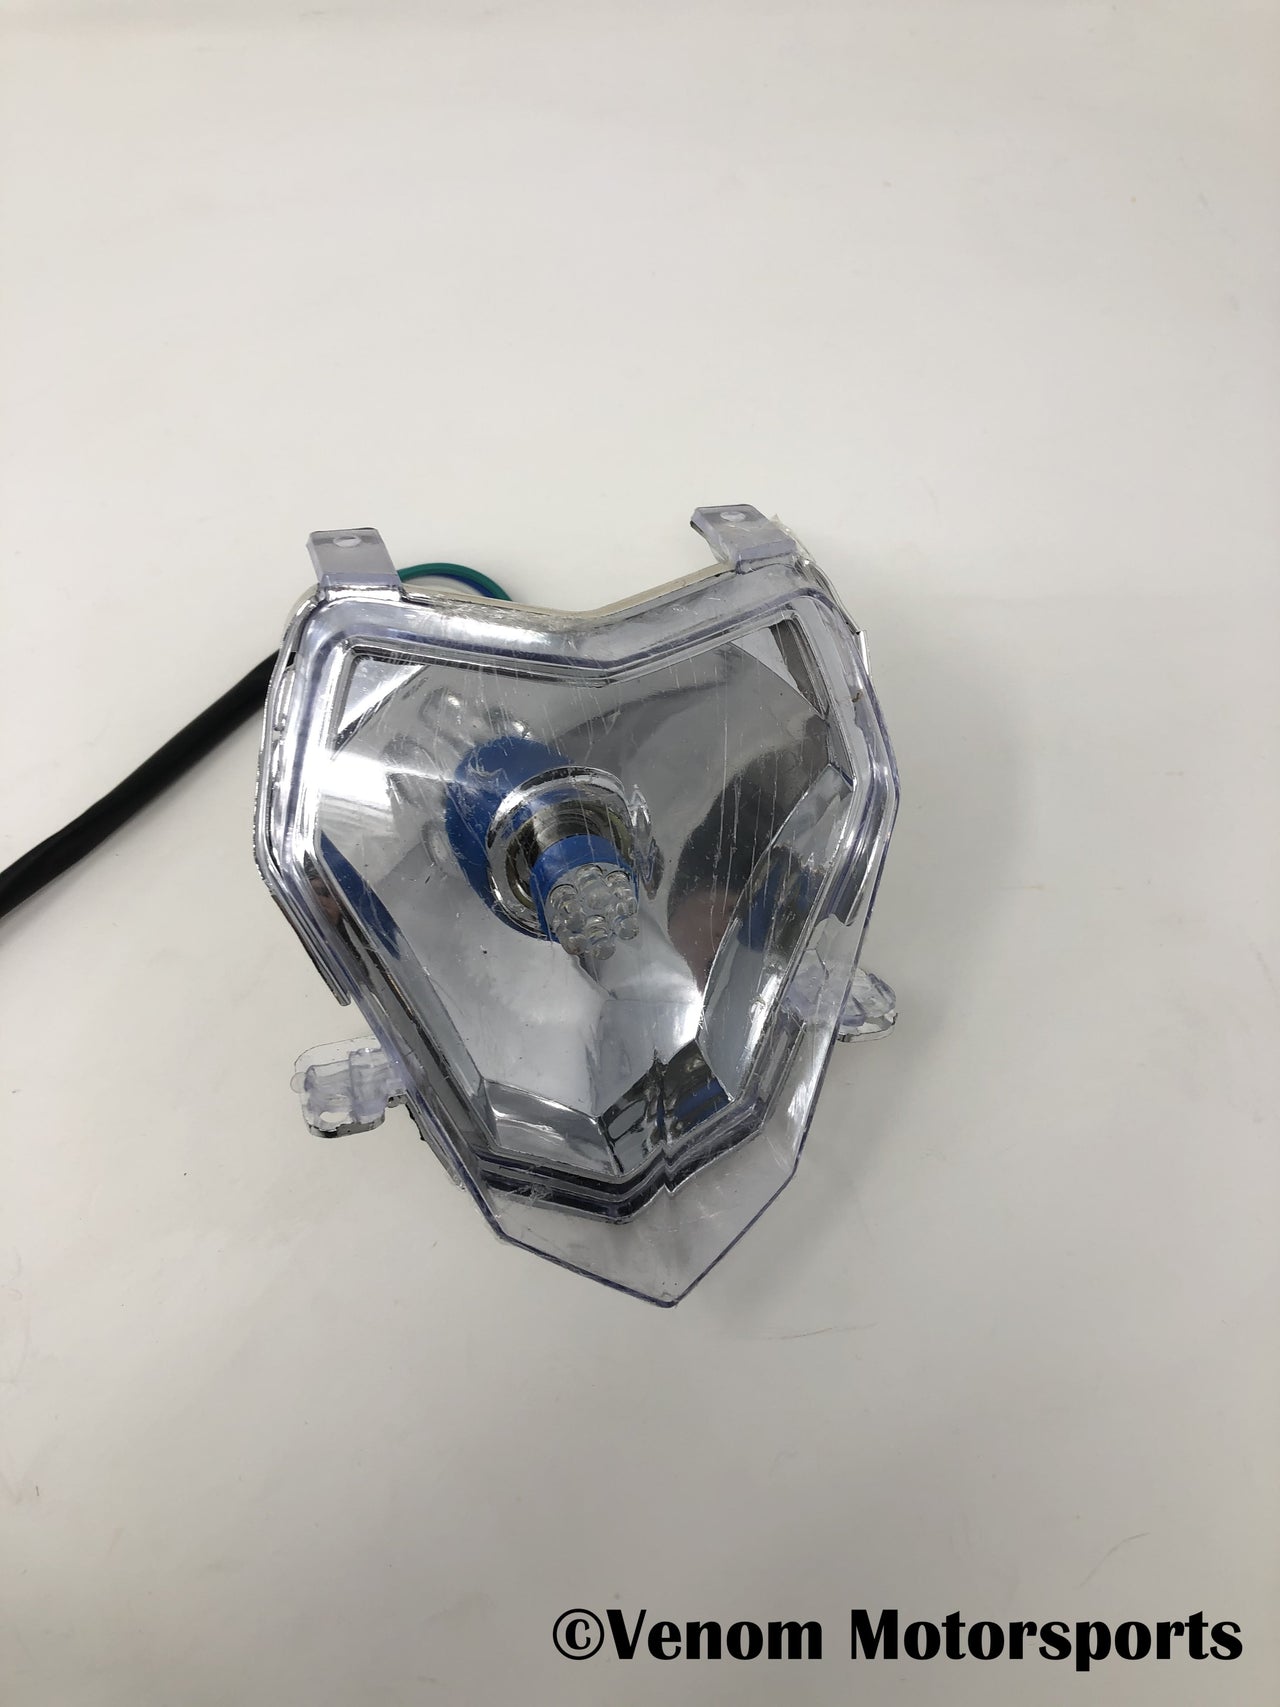 Replacement Front Headlight Assembly | Venom 1300W ATV